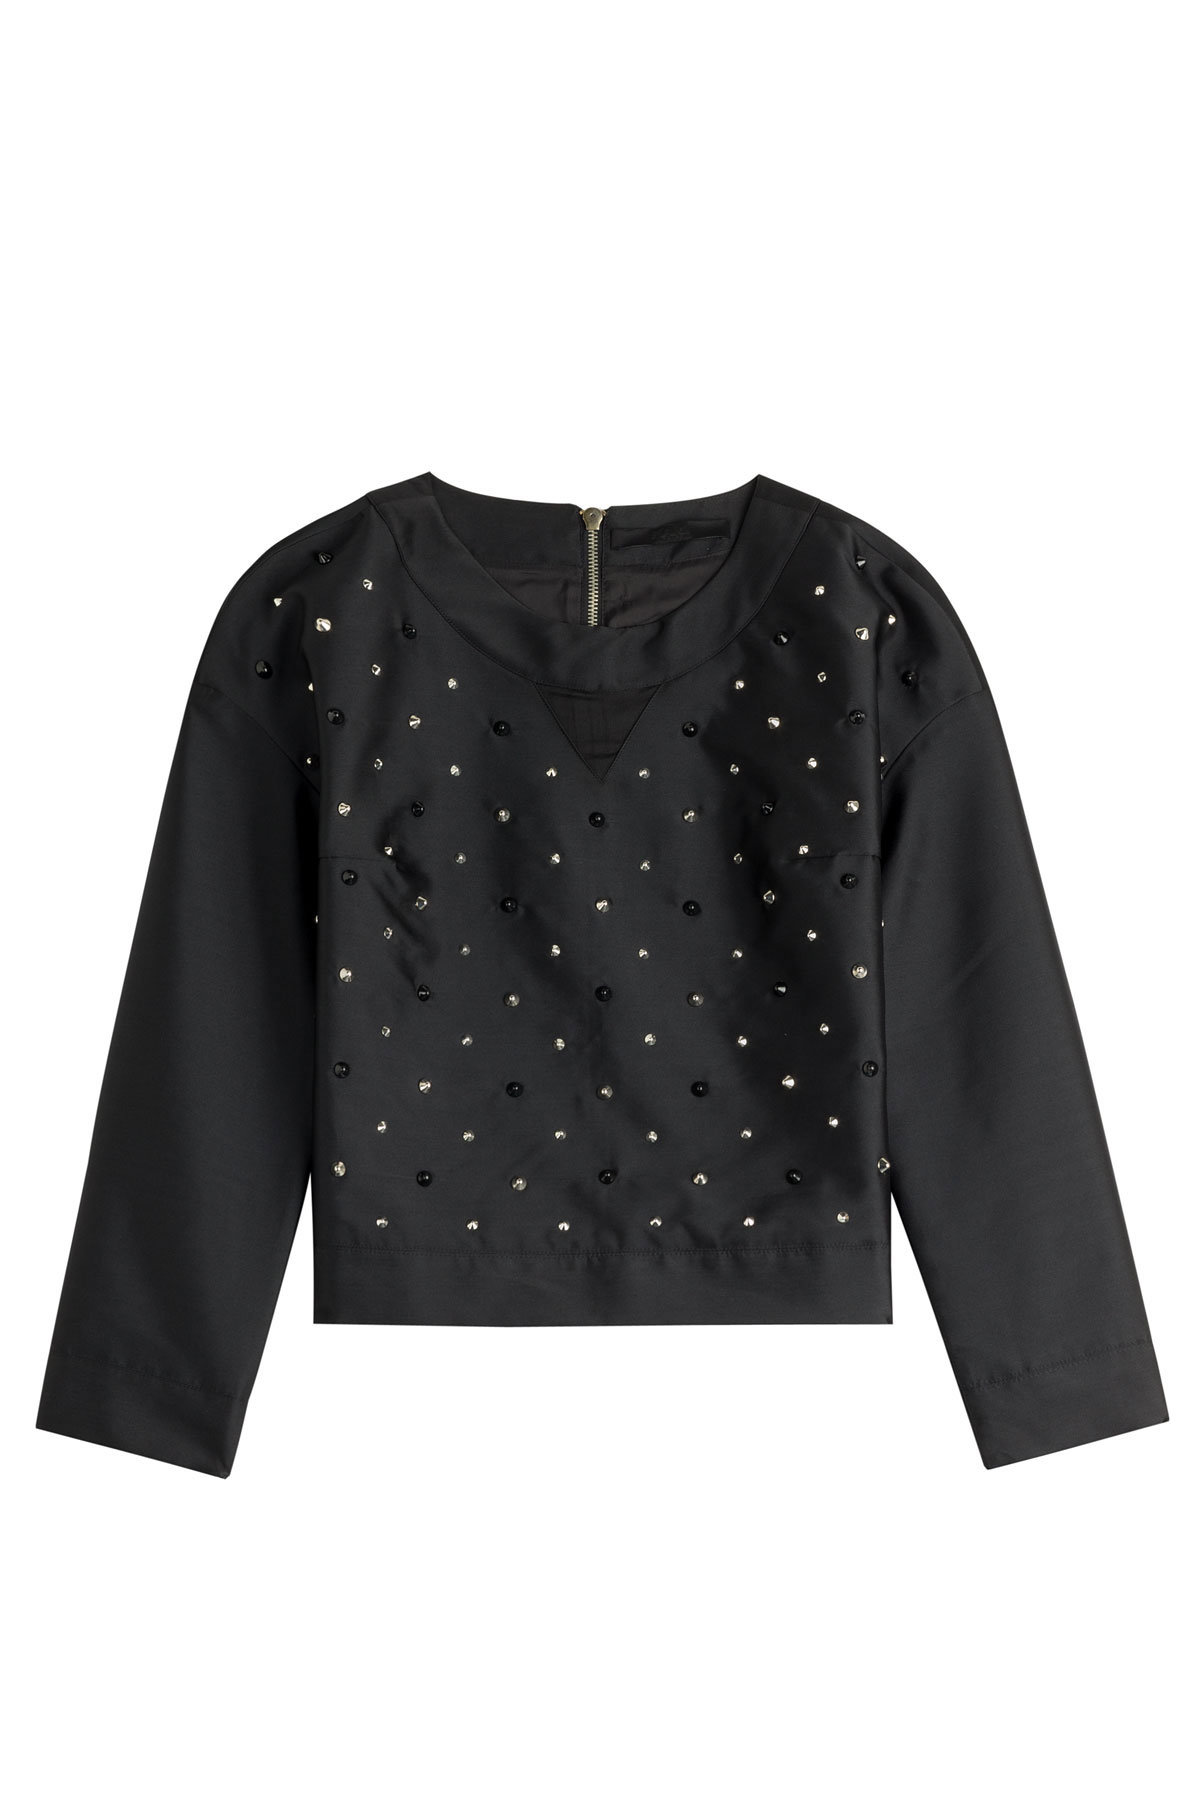 Karl Lagerfeld - Satin Twill Top with Sequin Embellishment